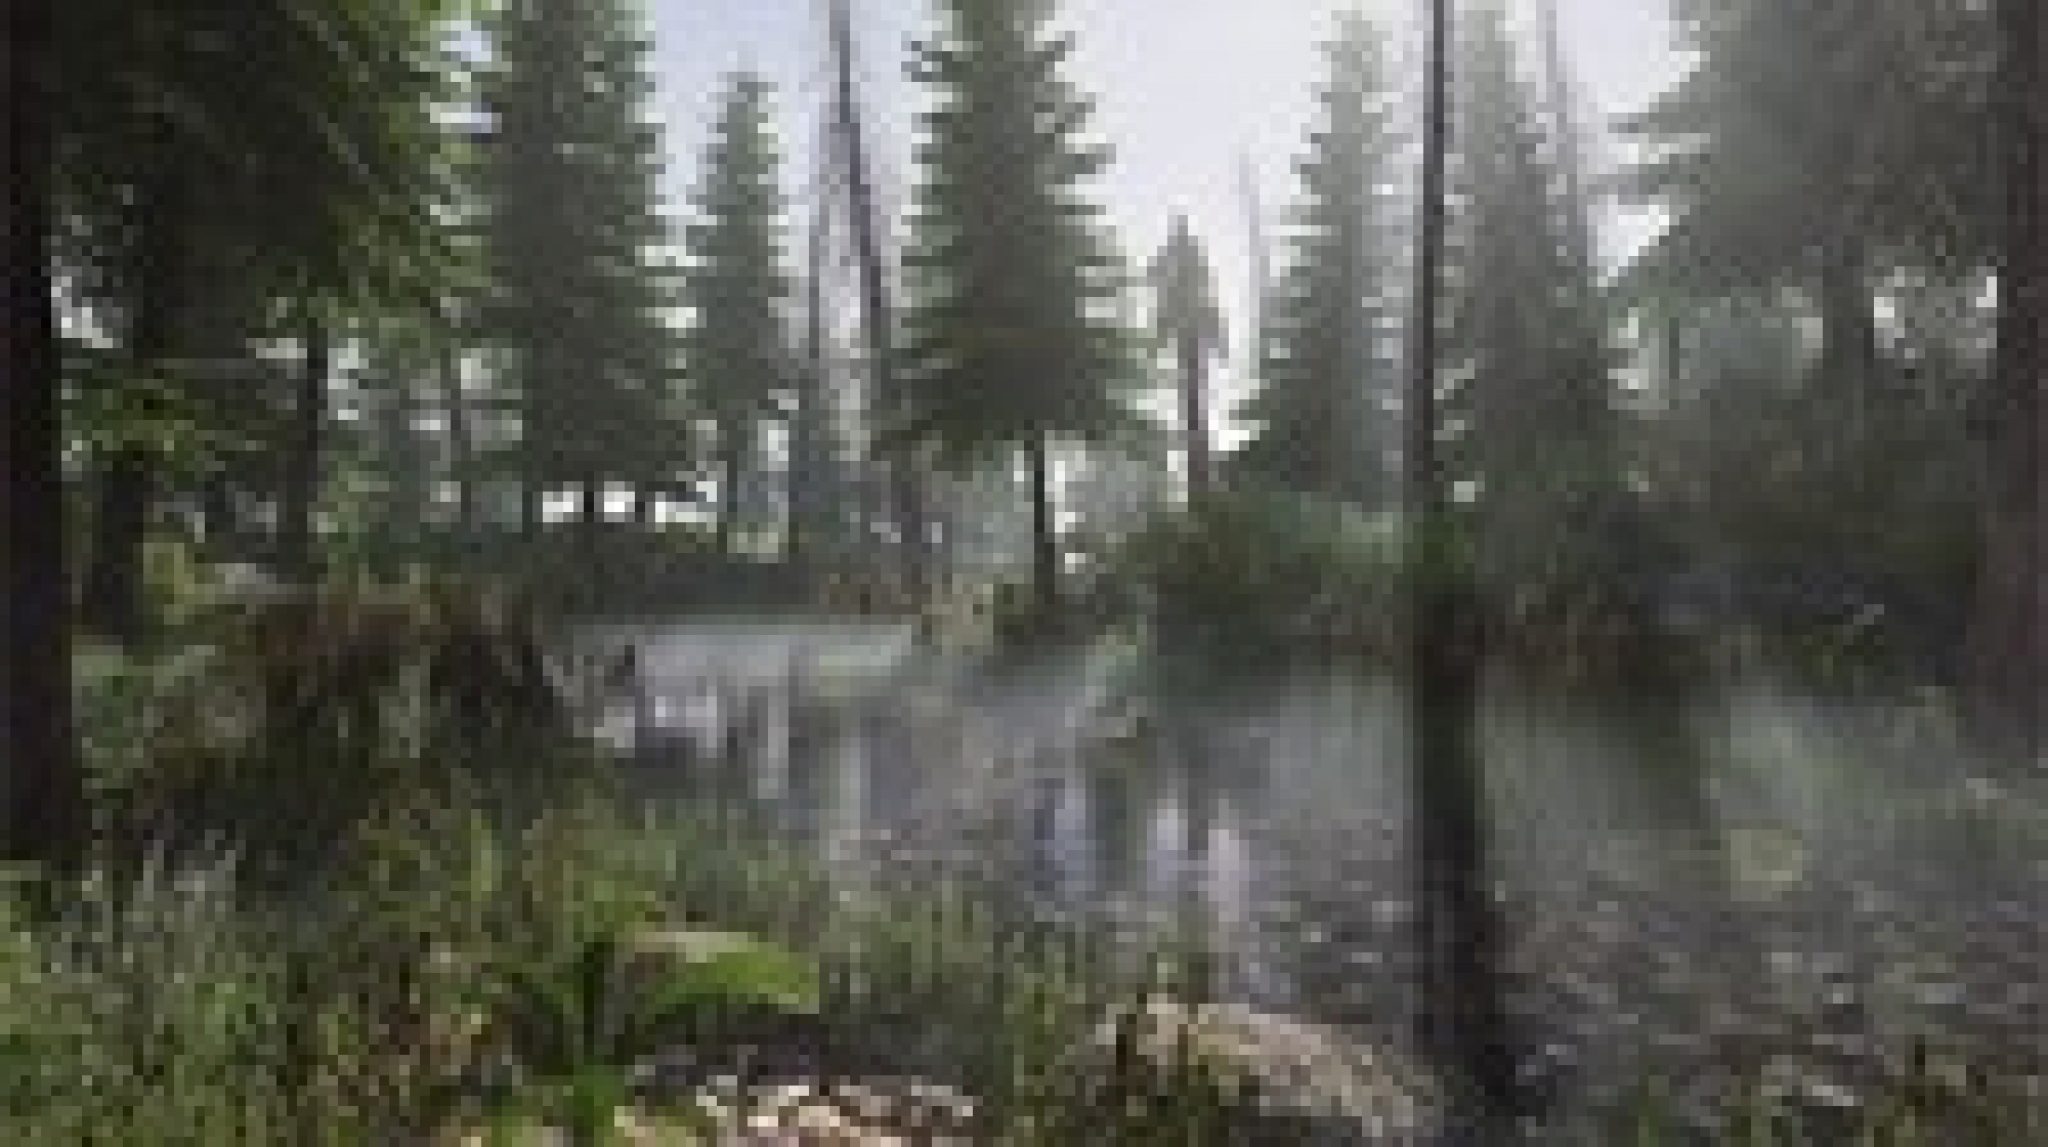 unreal engine 4 environment download free